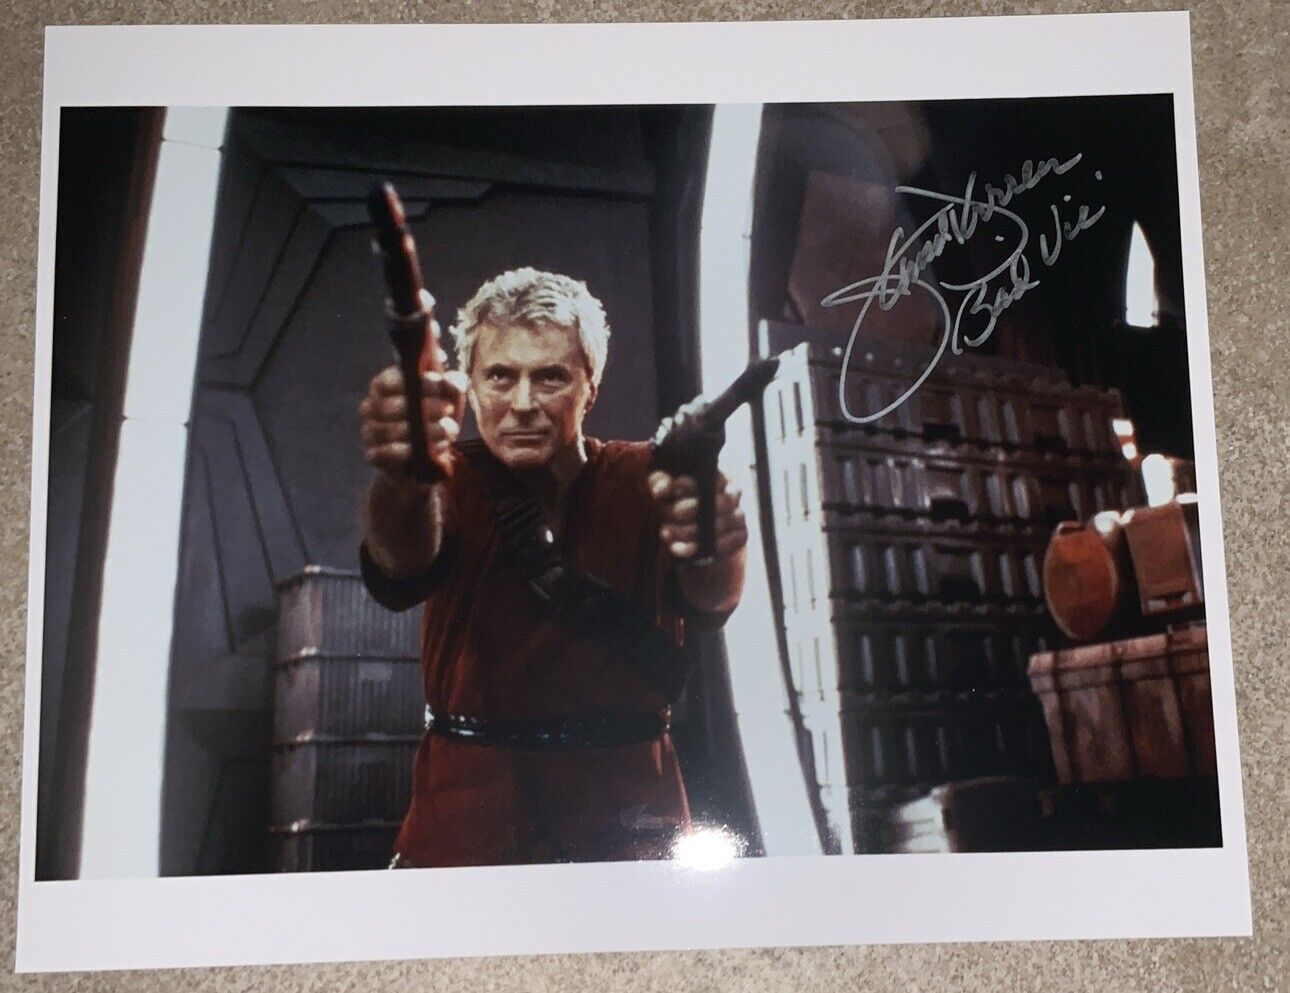 1998 DS9 James Darren (\'Bad Vic\' Fontaine) signed 8 X 10 Color RARE Photograph